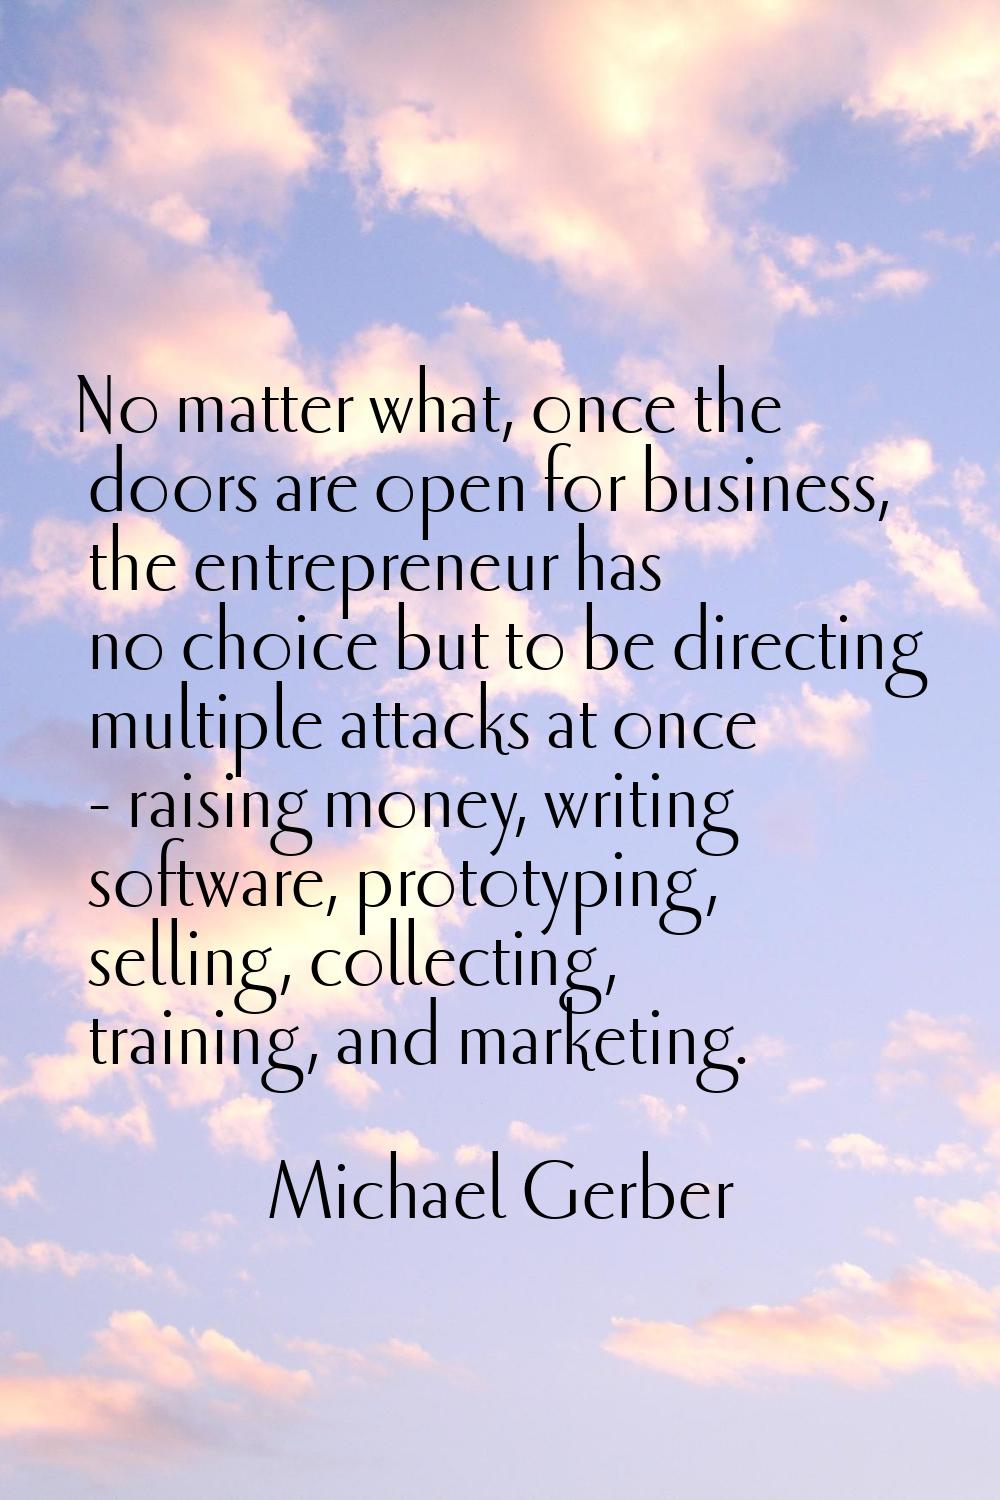 No matter what, once the doors are open for business, the entrepreneur has no choice but to be dire